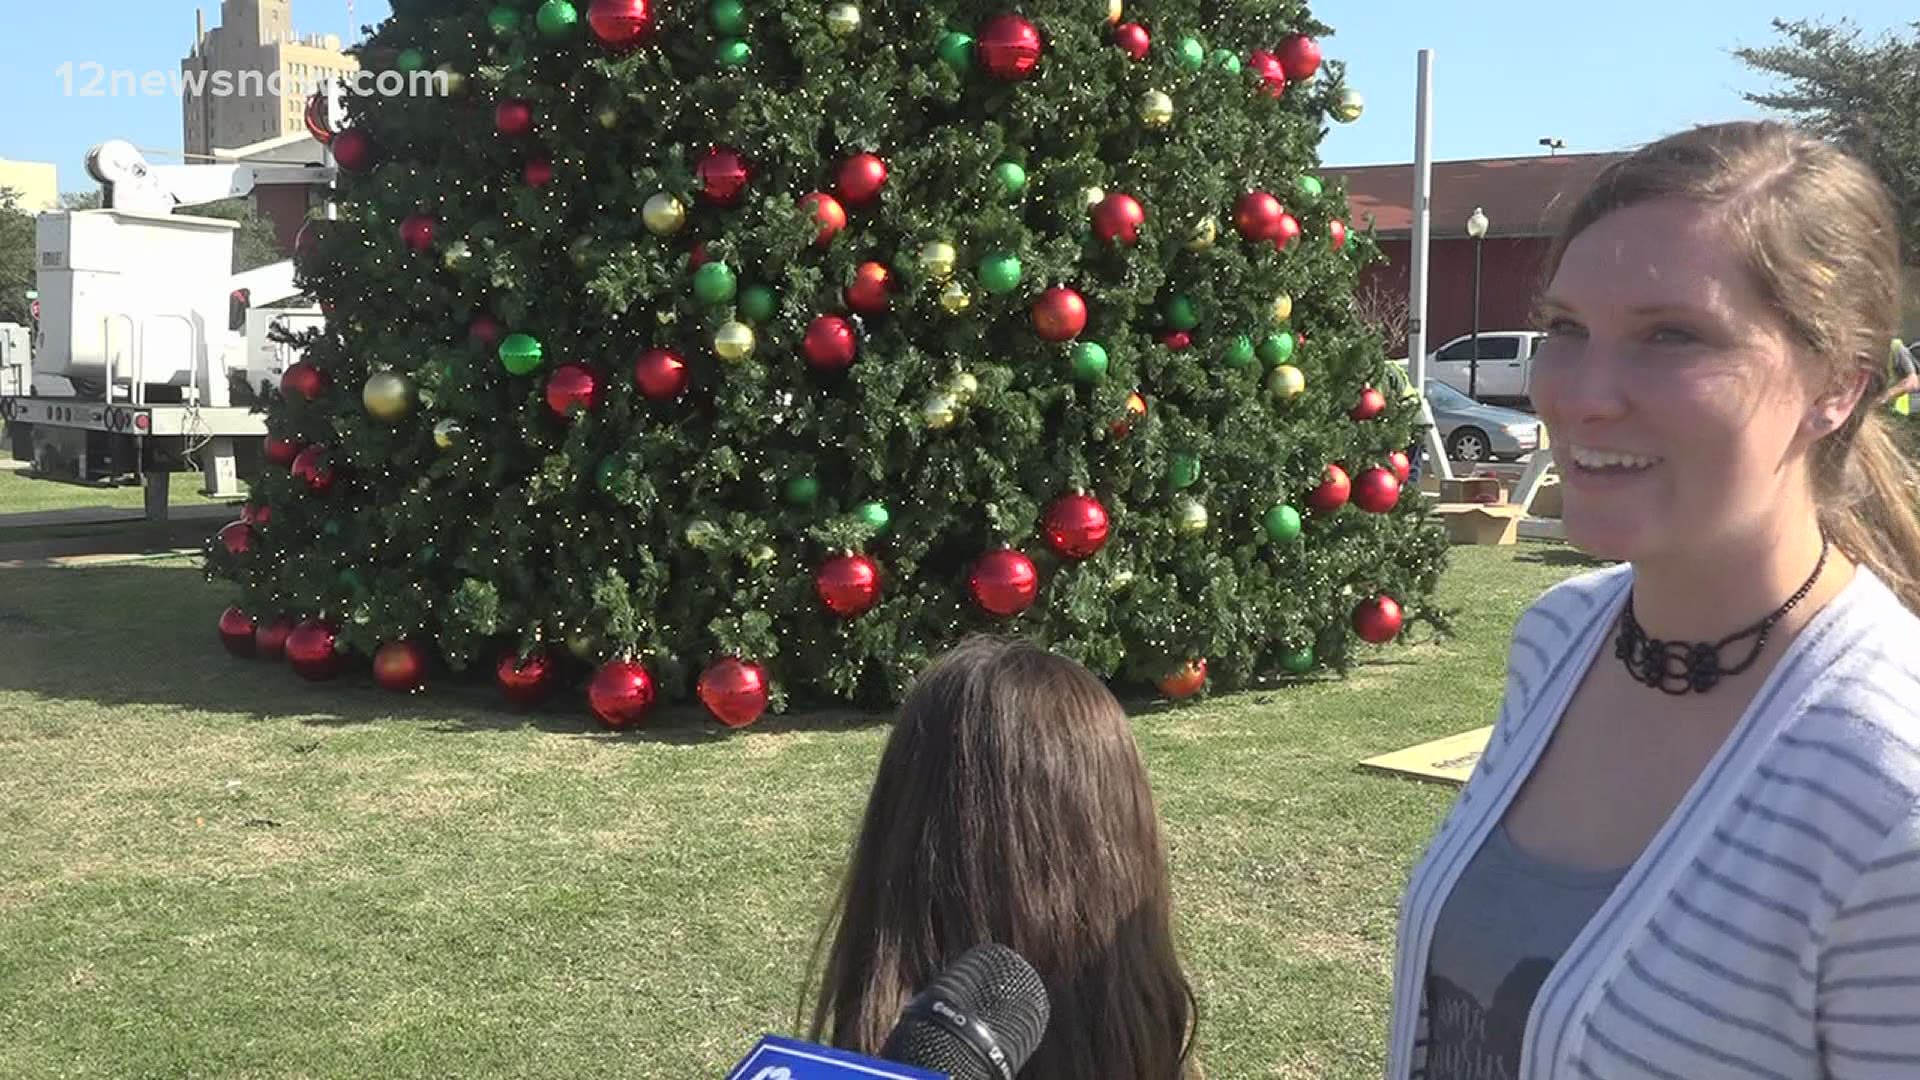 Beaumont city workers have started putting up decorations. The most recent installation is a 26-foot Christmas tree at the Event Centre.